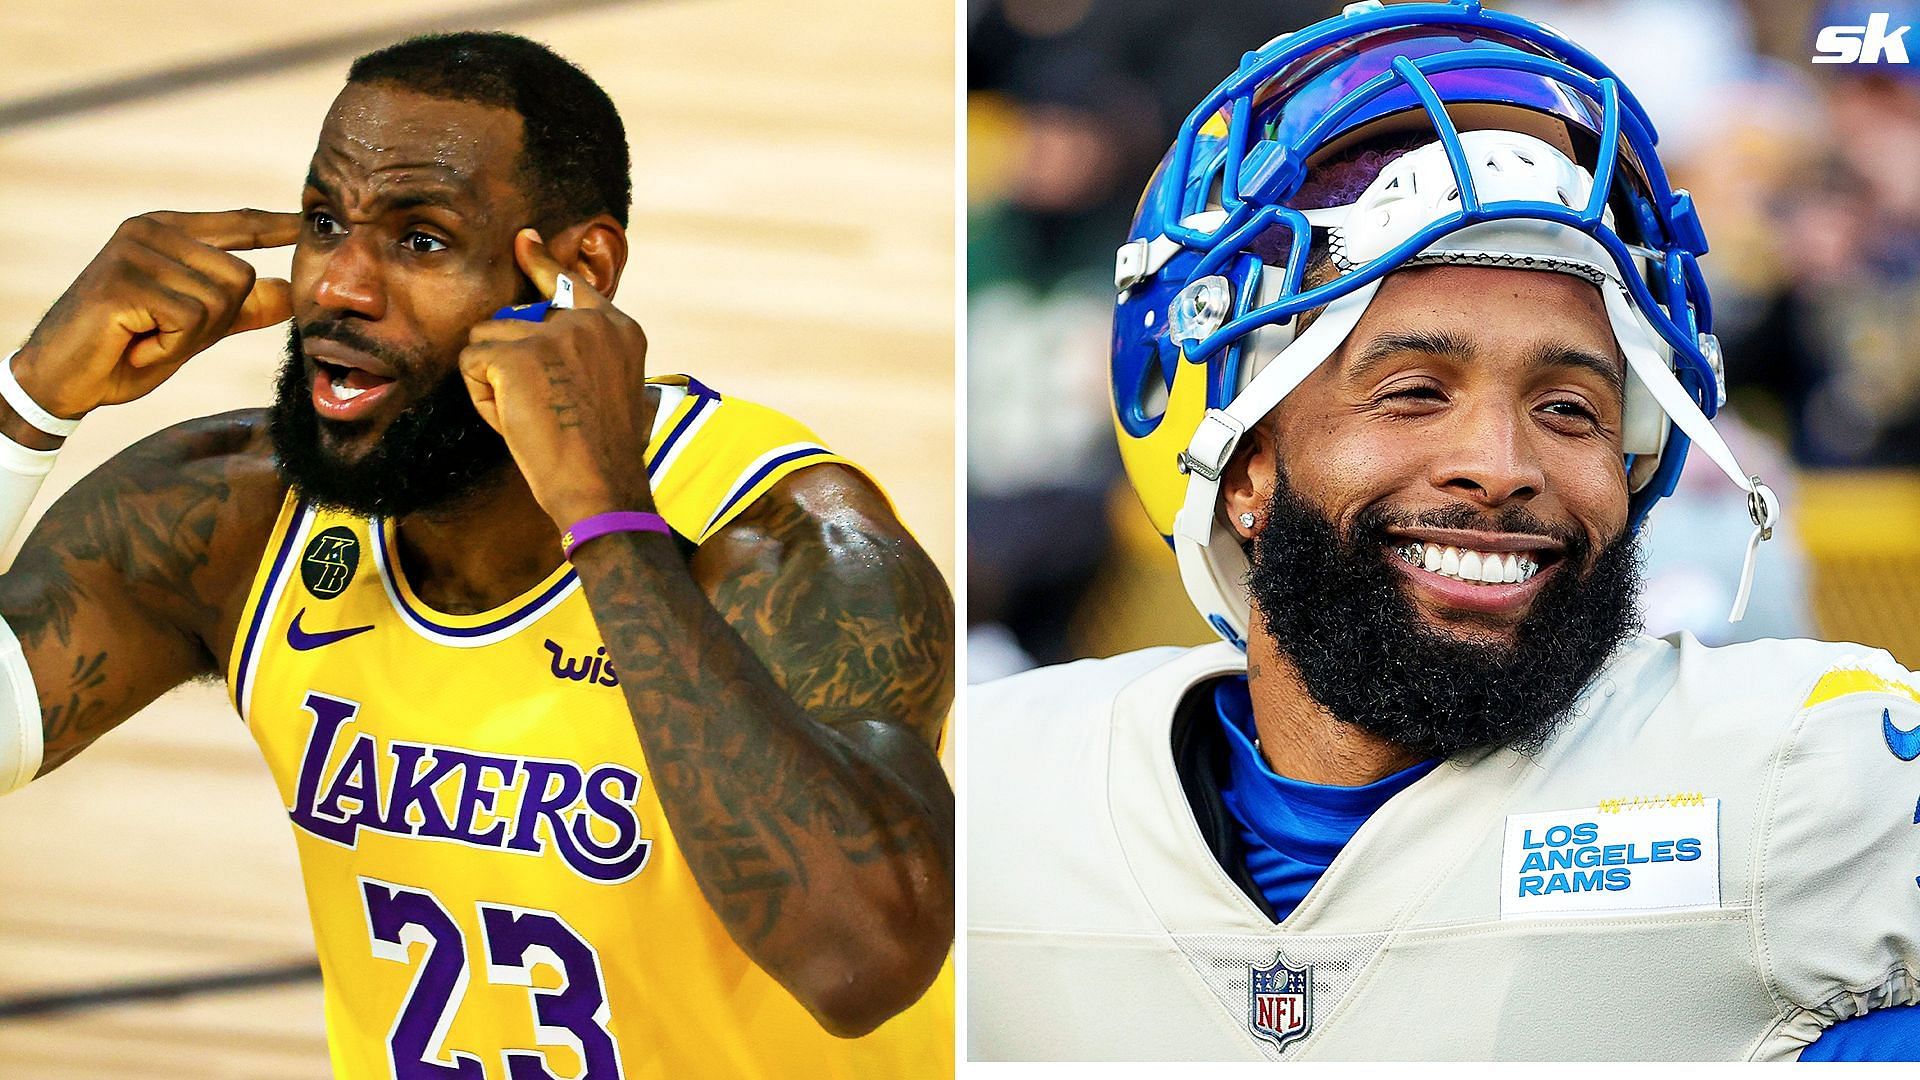 Los Angeles Lakers small forward LeBron James and Los Angeles Rams wide receiver Odell Beckham Jr